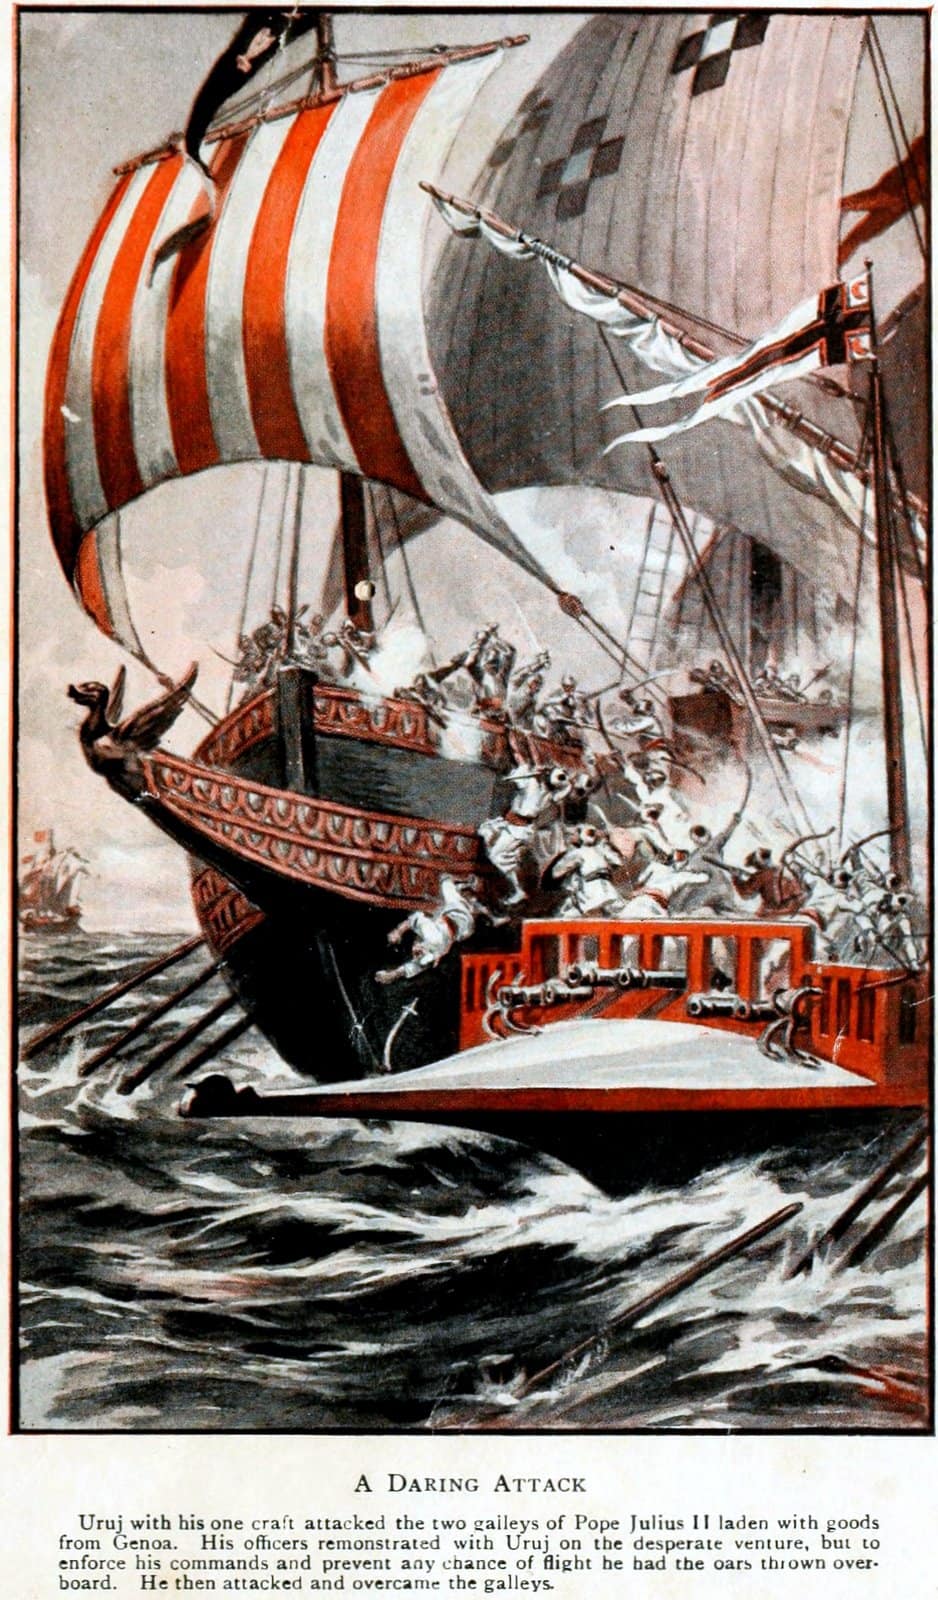 From Daring Deeds of Famous Pirates by Edward Keble Chatterton (published 1917)